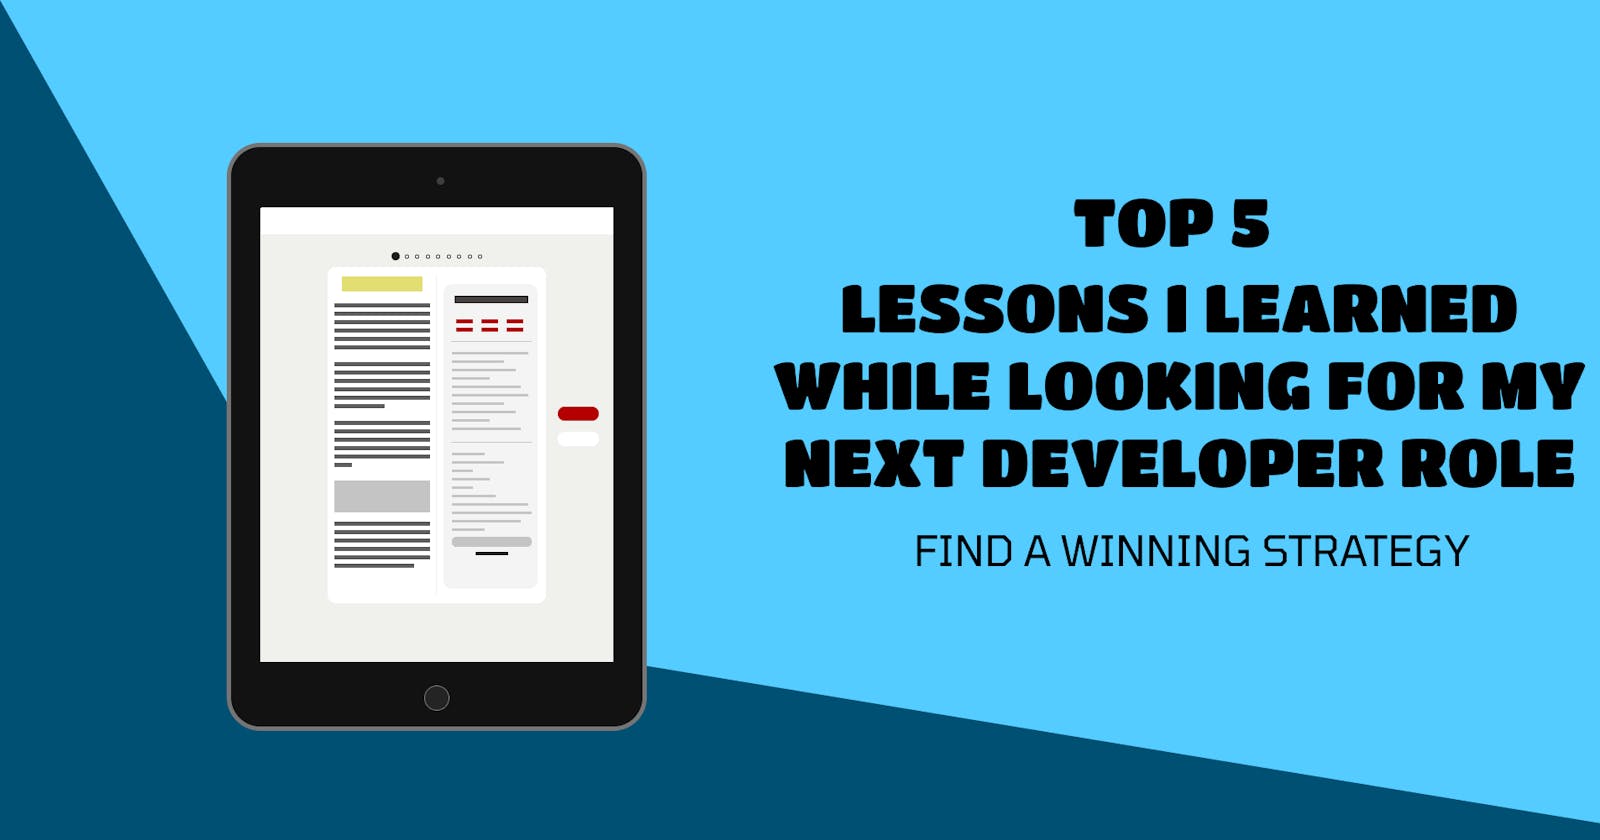 Top 5 lessons I learned while looking for my next developer role